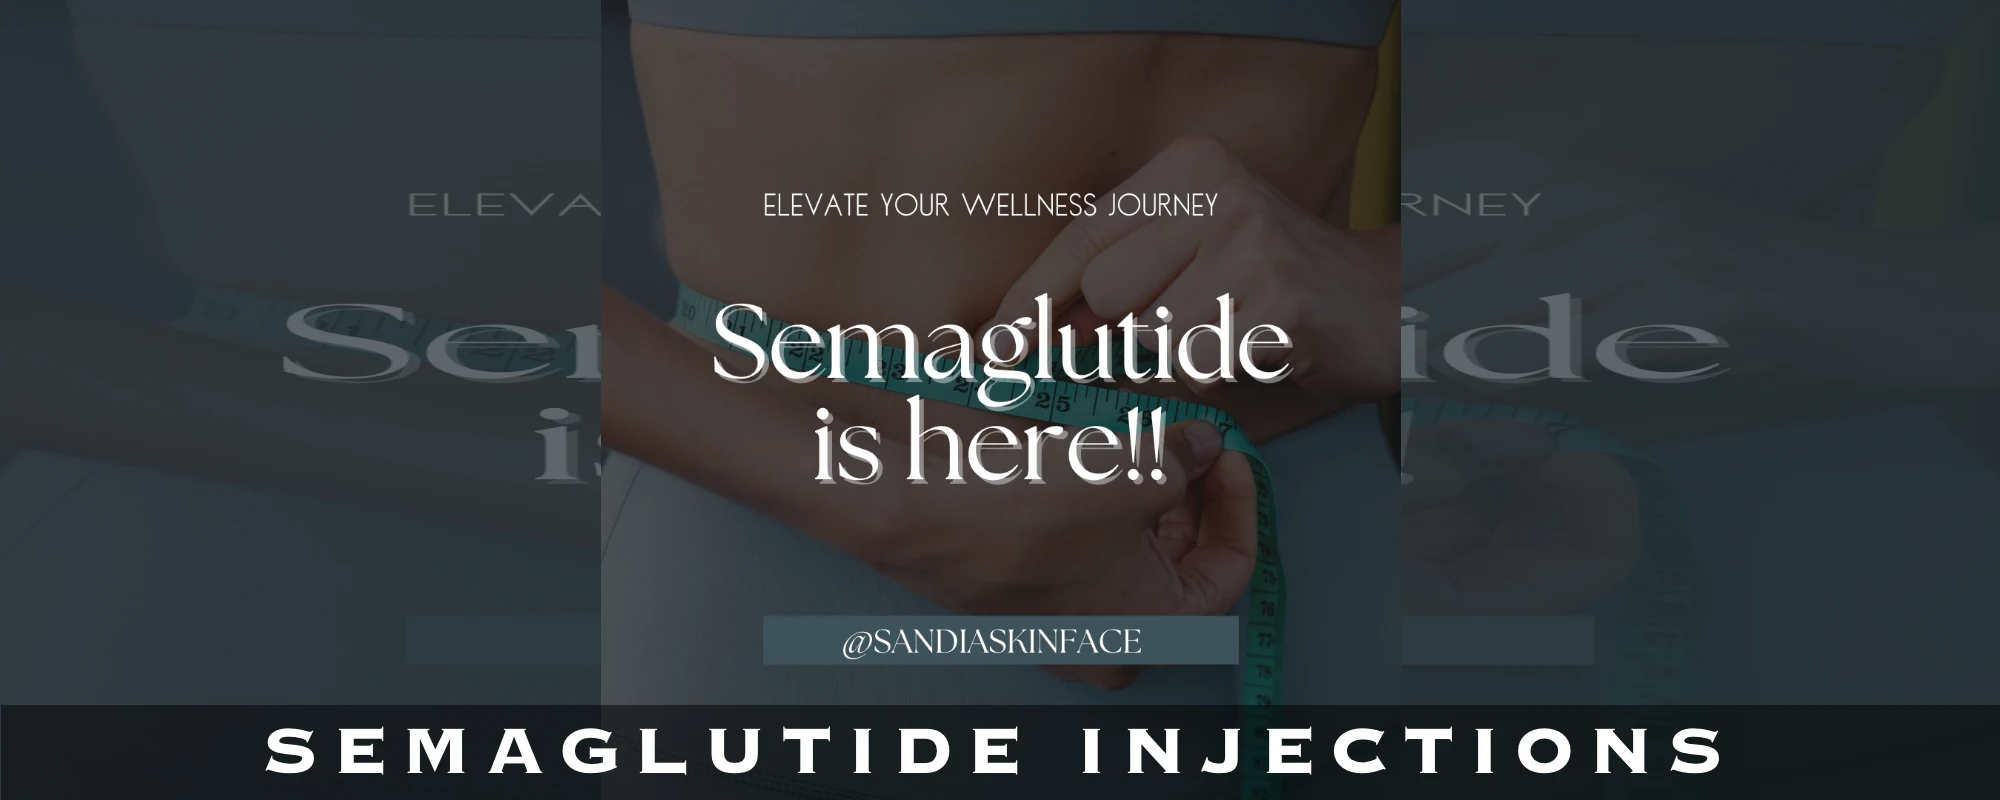 SEMAGLUTIDE WEIGHT LOSS INJECTIONS